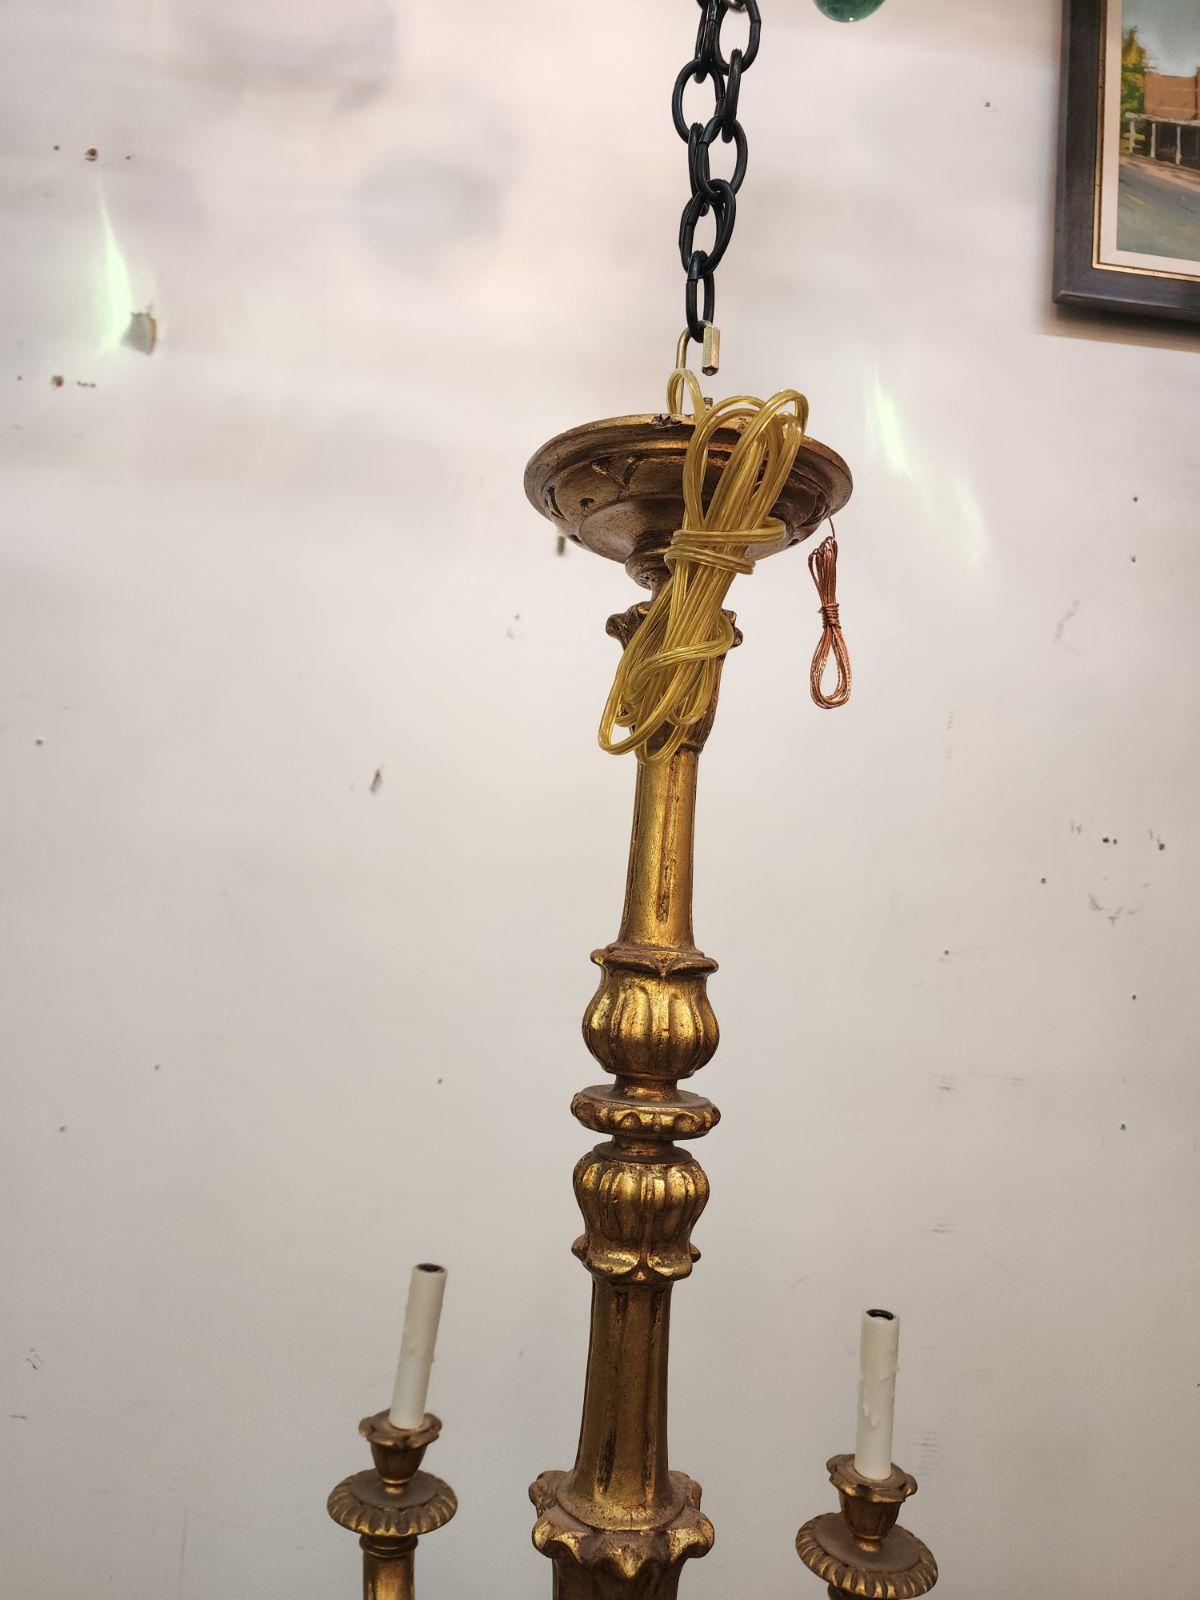 This is a beautiful Italian Giltwood chandelier with 13 lights. has 6 arms, each containing two lights. Has a single light in the center. It is rewired and ready to be hanged. 